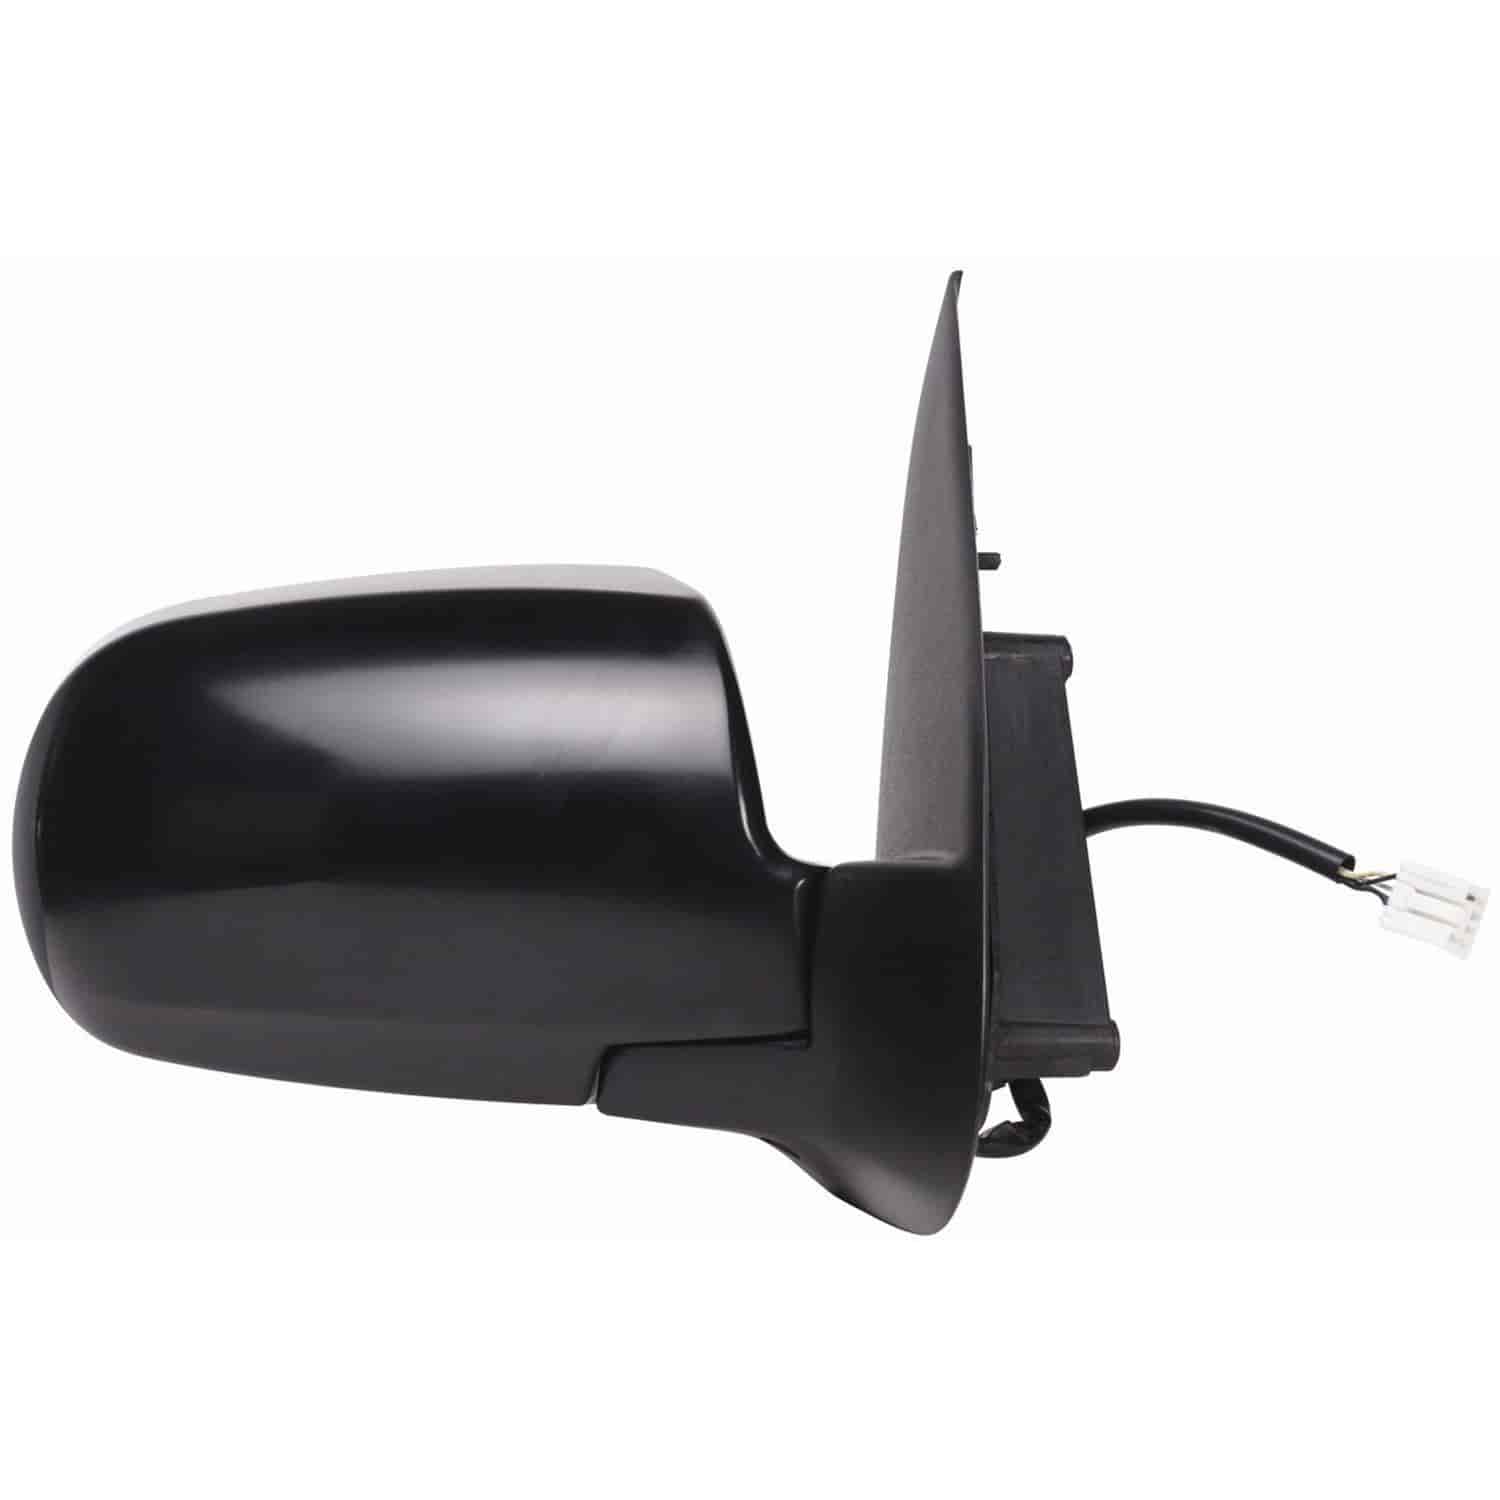 OEM Style Replacement mirror for 05-06 Mazda Tribute passenger side mirror tested to fit and functio